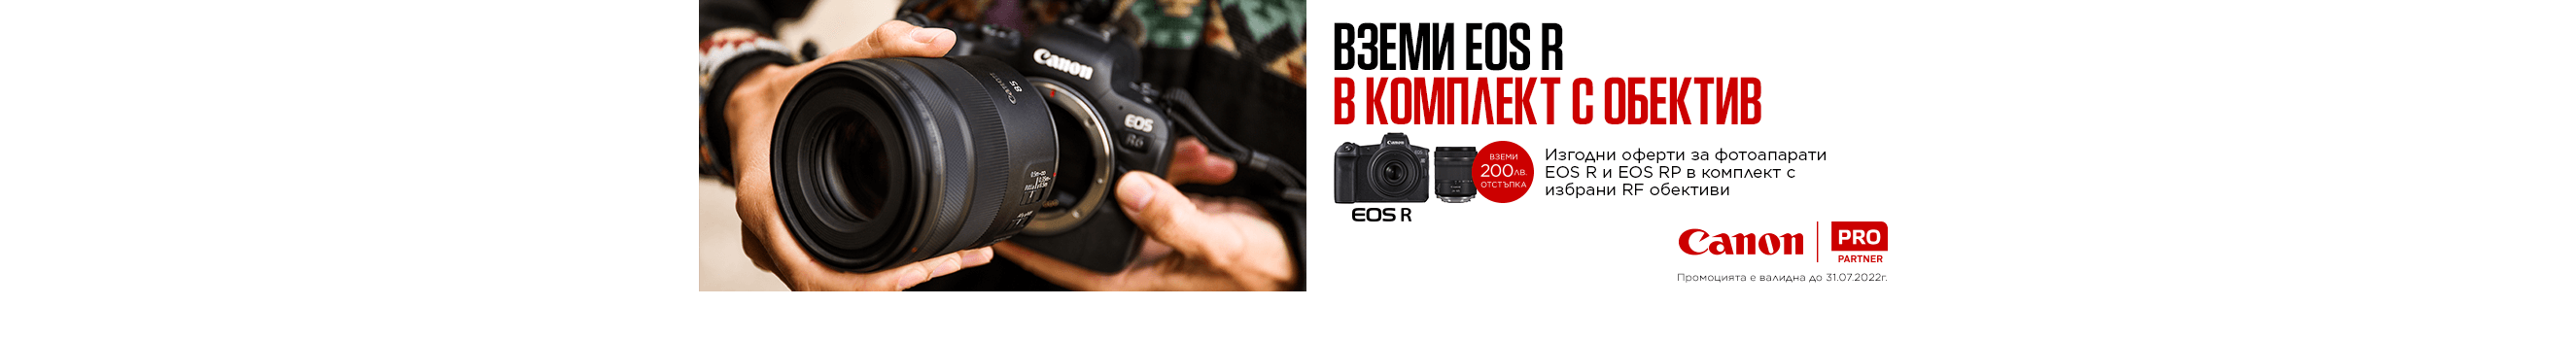  Canon EOS R / RP Cameras + Lenses with 200 BGN Discount in PhotoSynthesis Stores